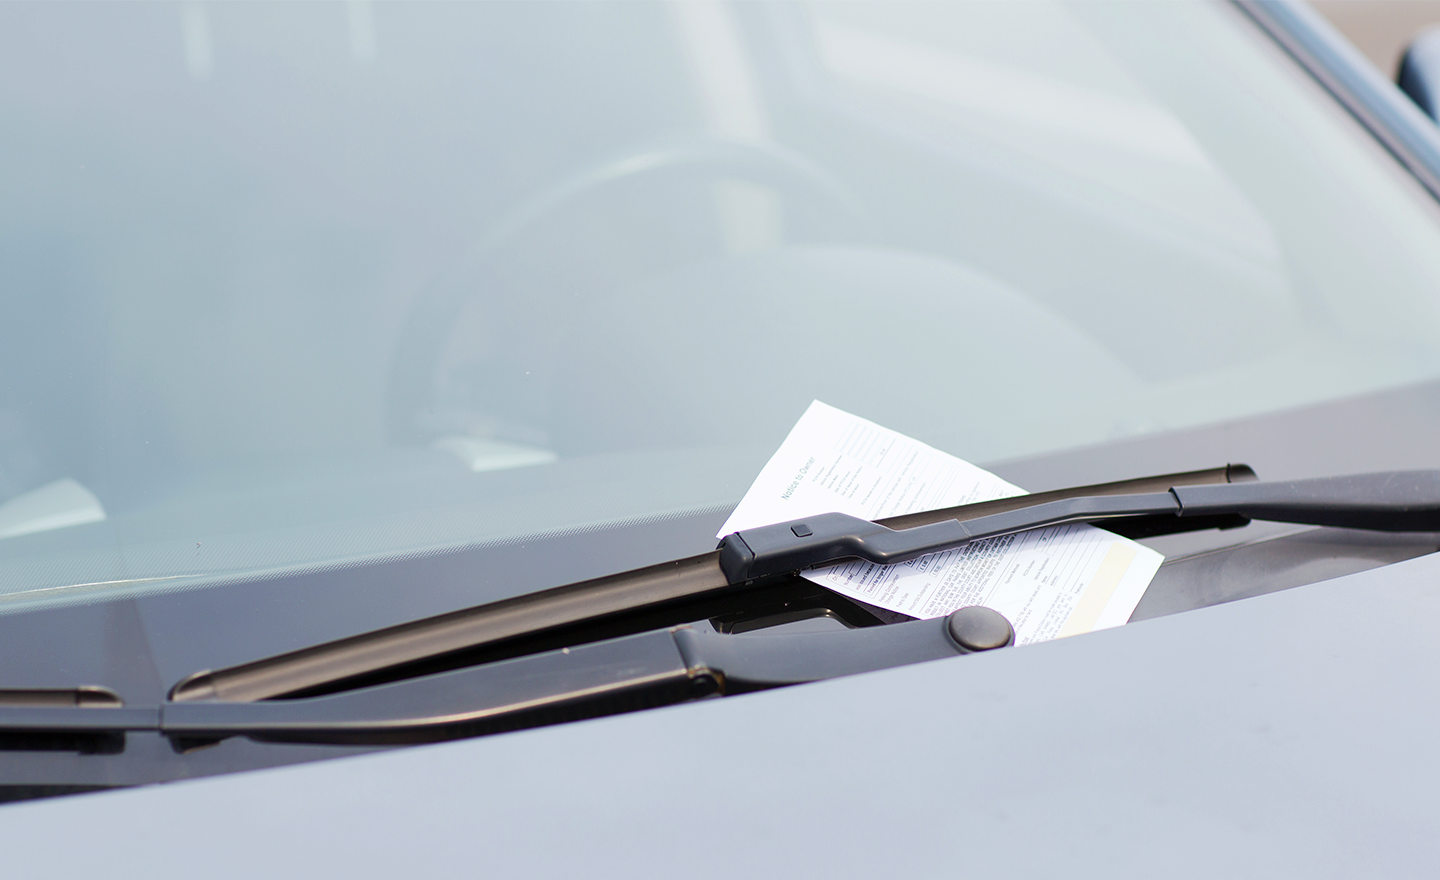 Parking ticket is placed under windshield wipers of vehicle